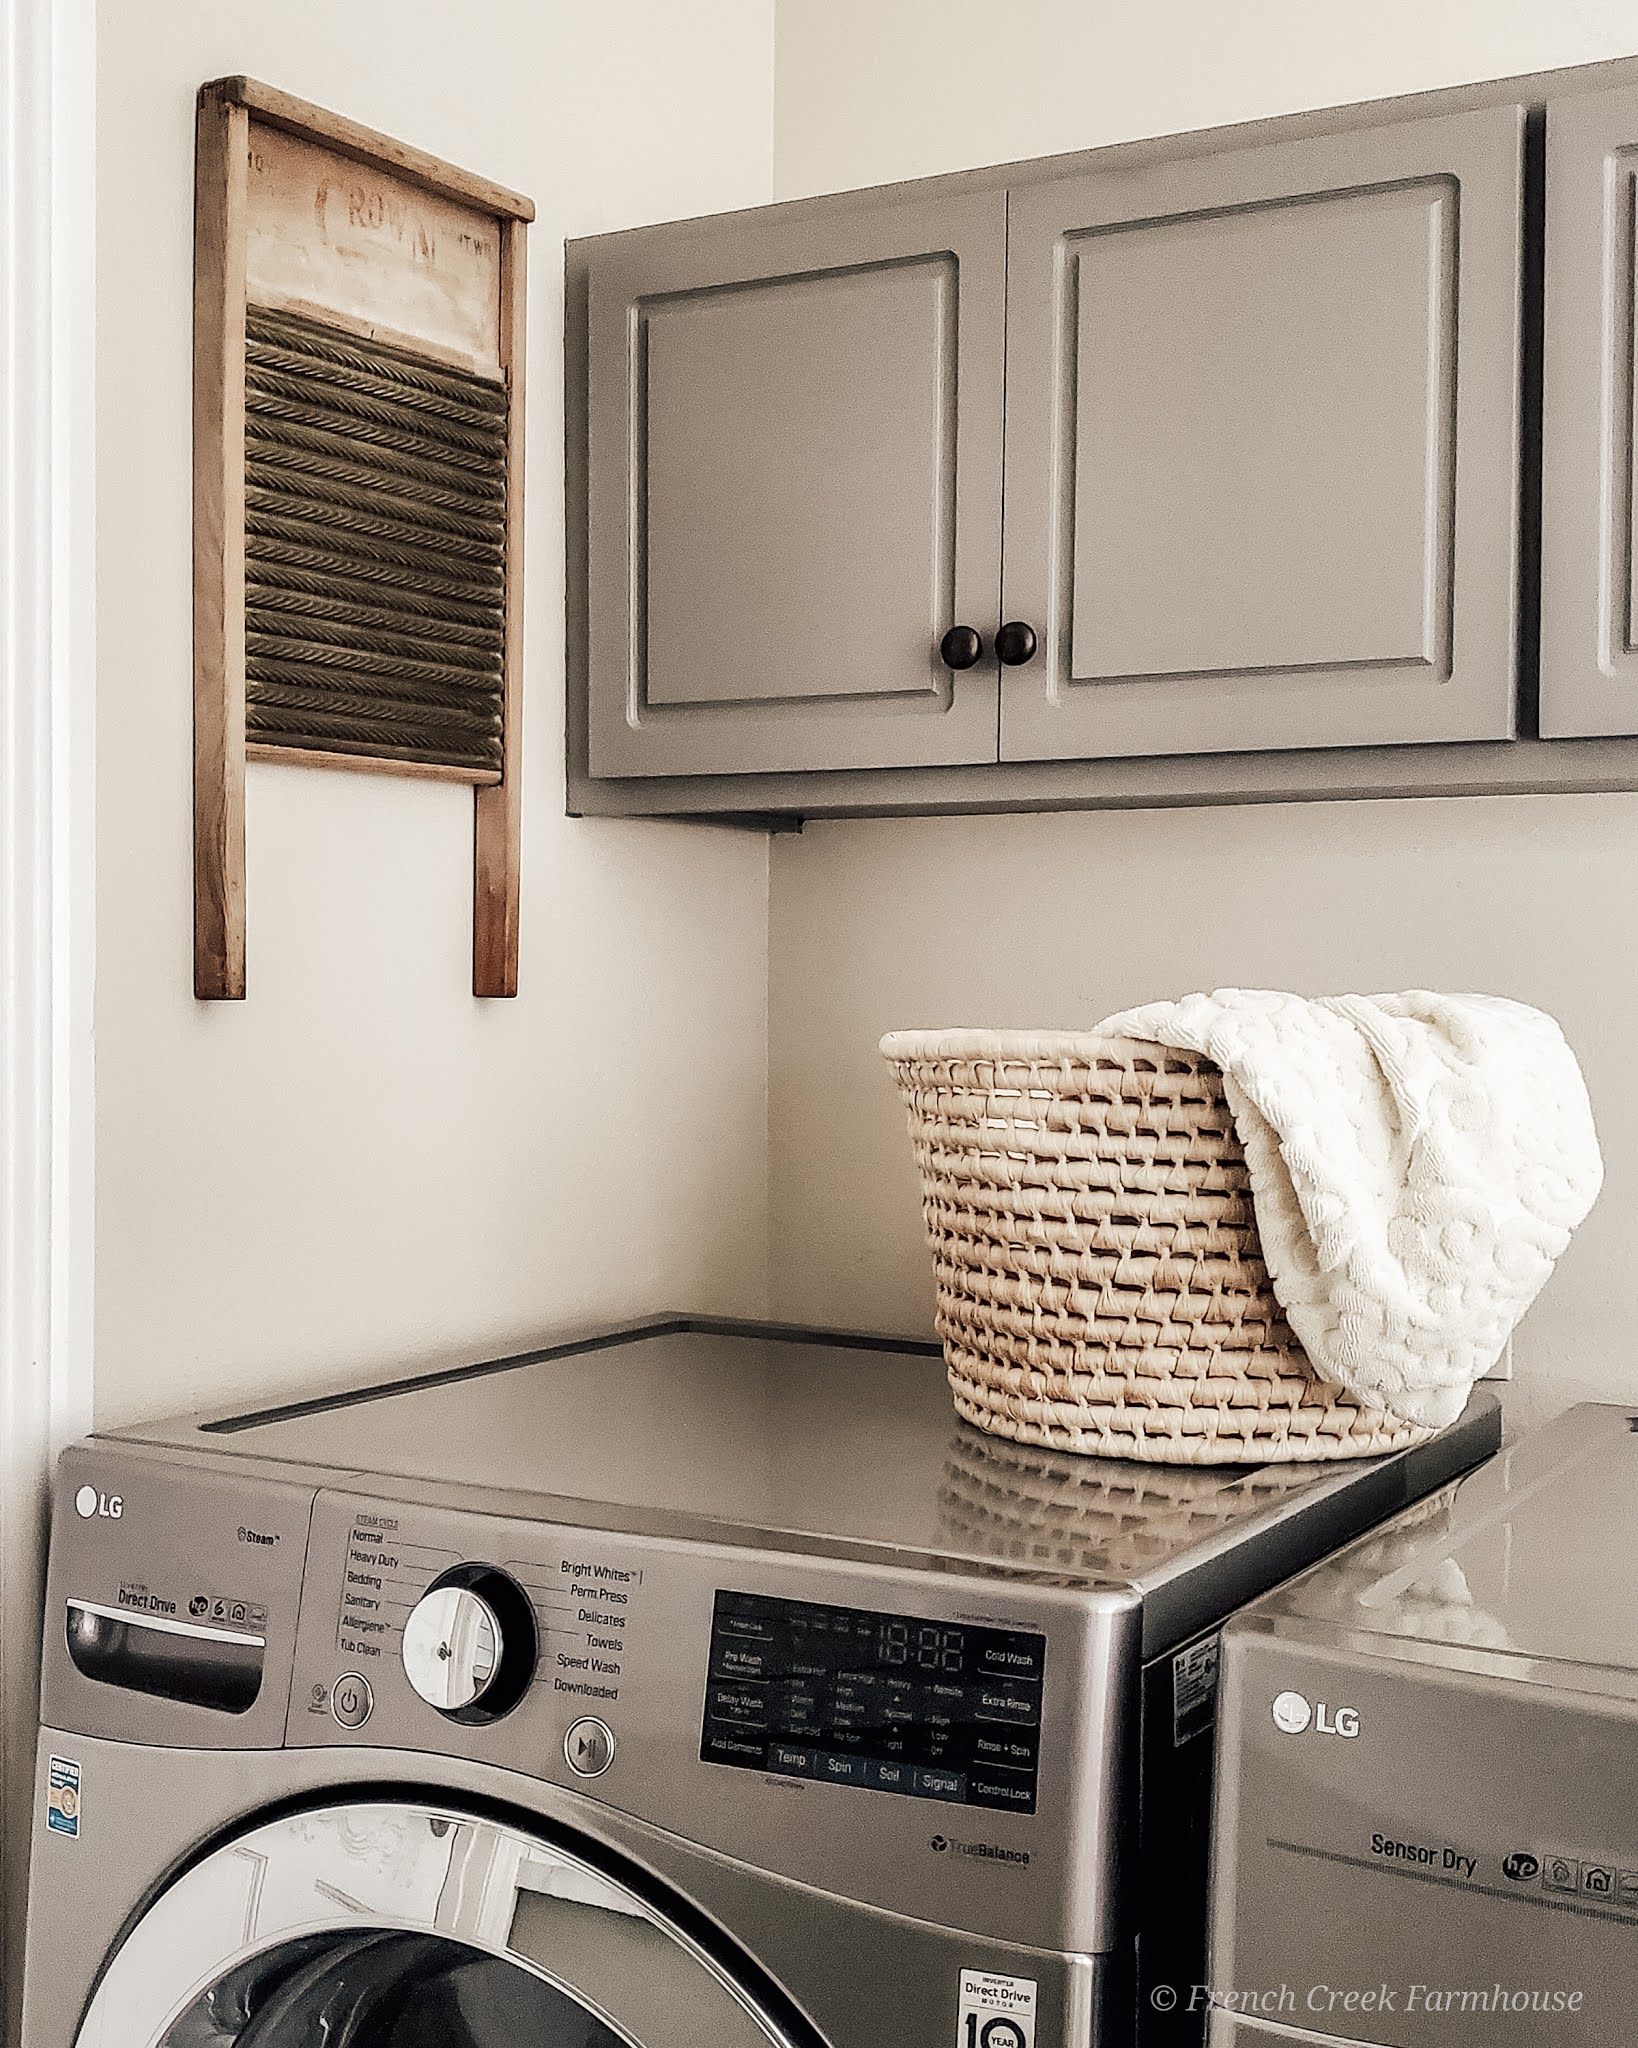 We added a vintage washboard as wall decor to our laundry room